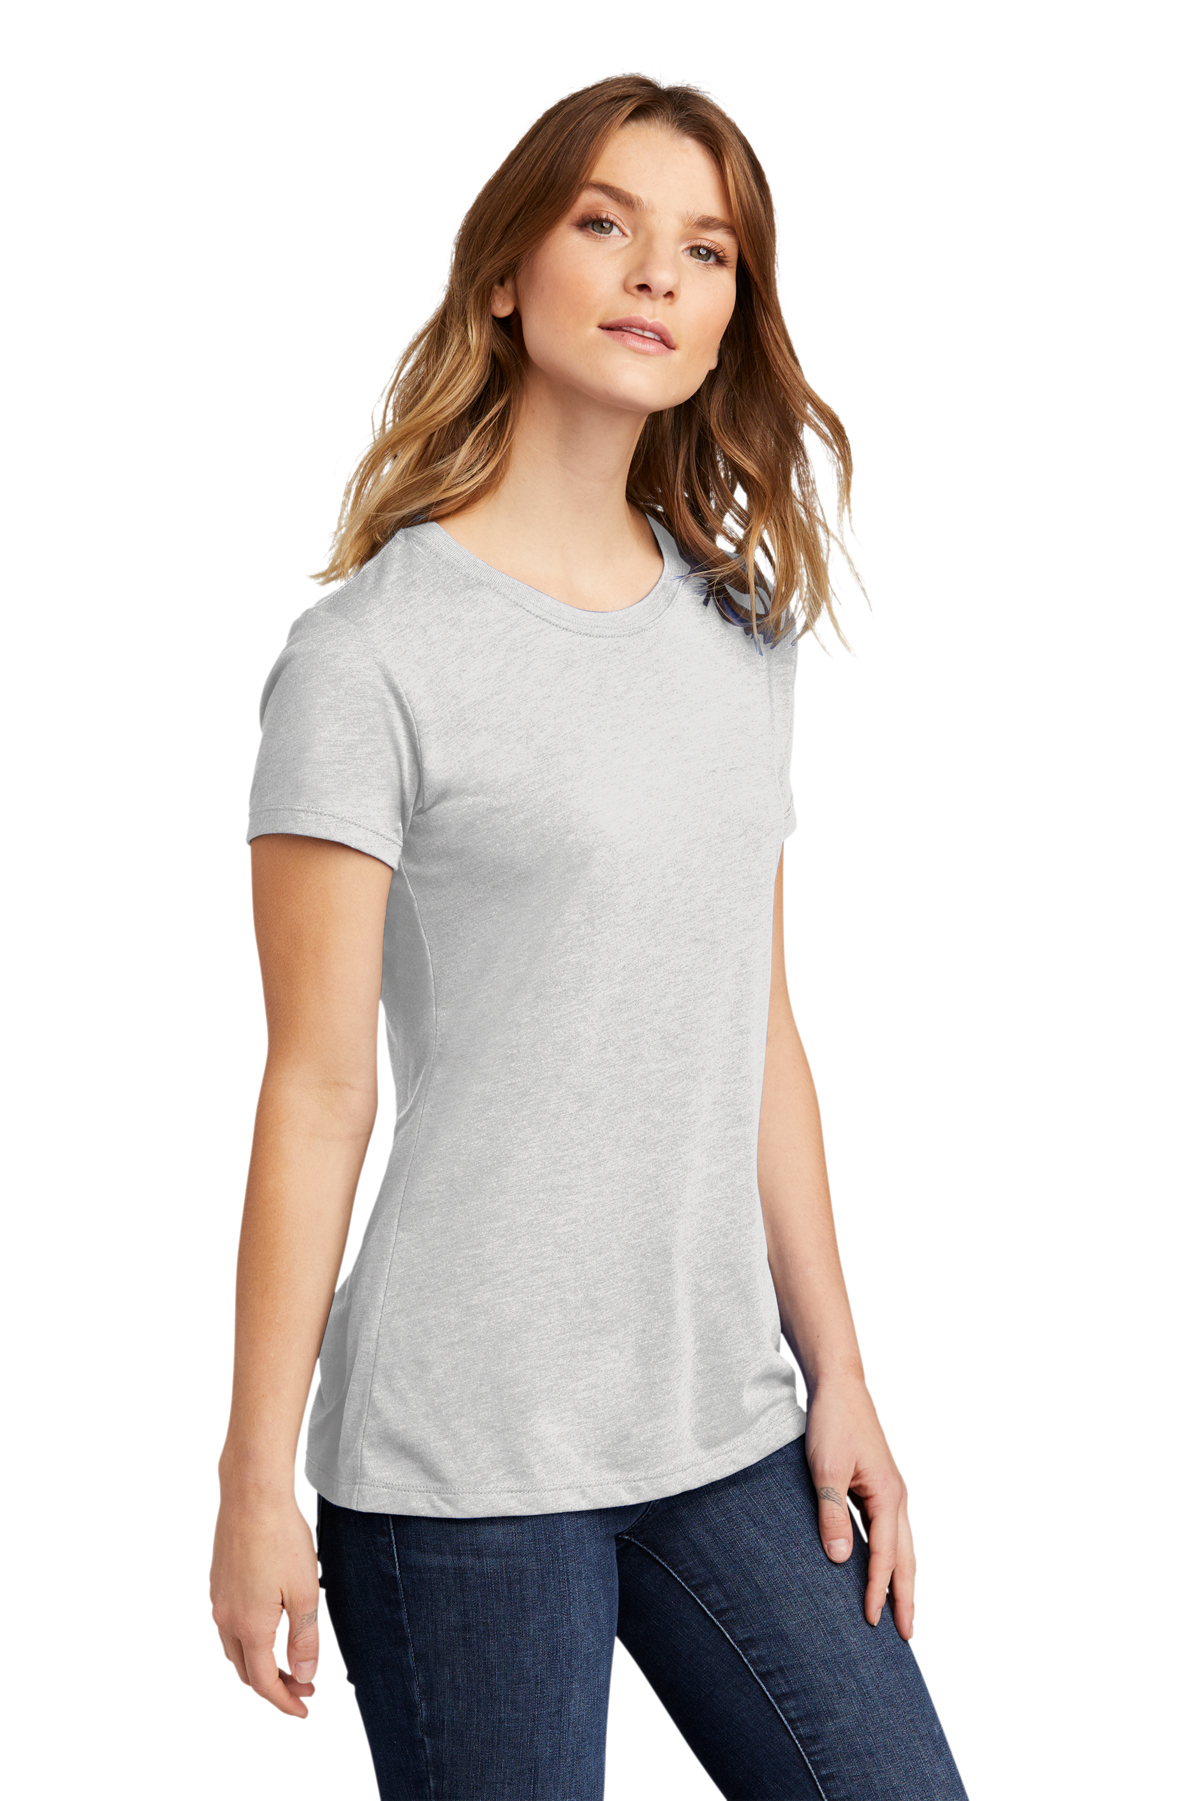 Next Level Apparel Women’s Tri-Blend Tee | Product | Company Casuals